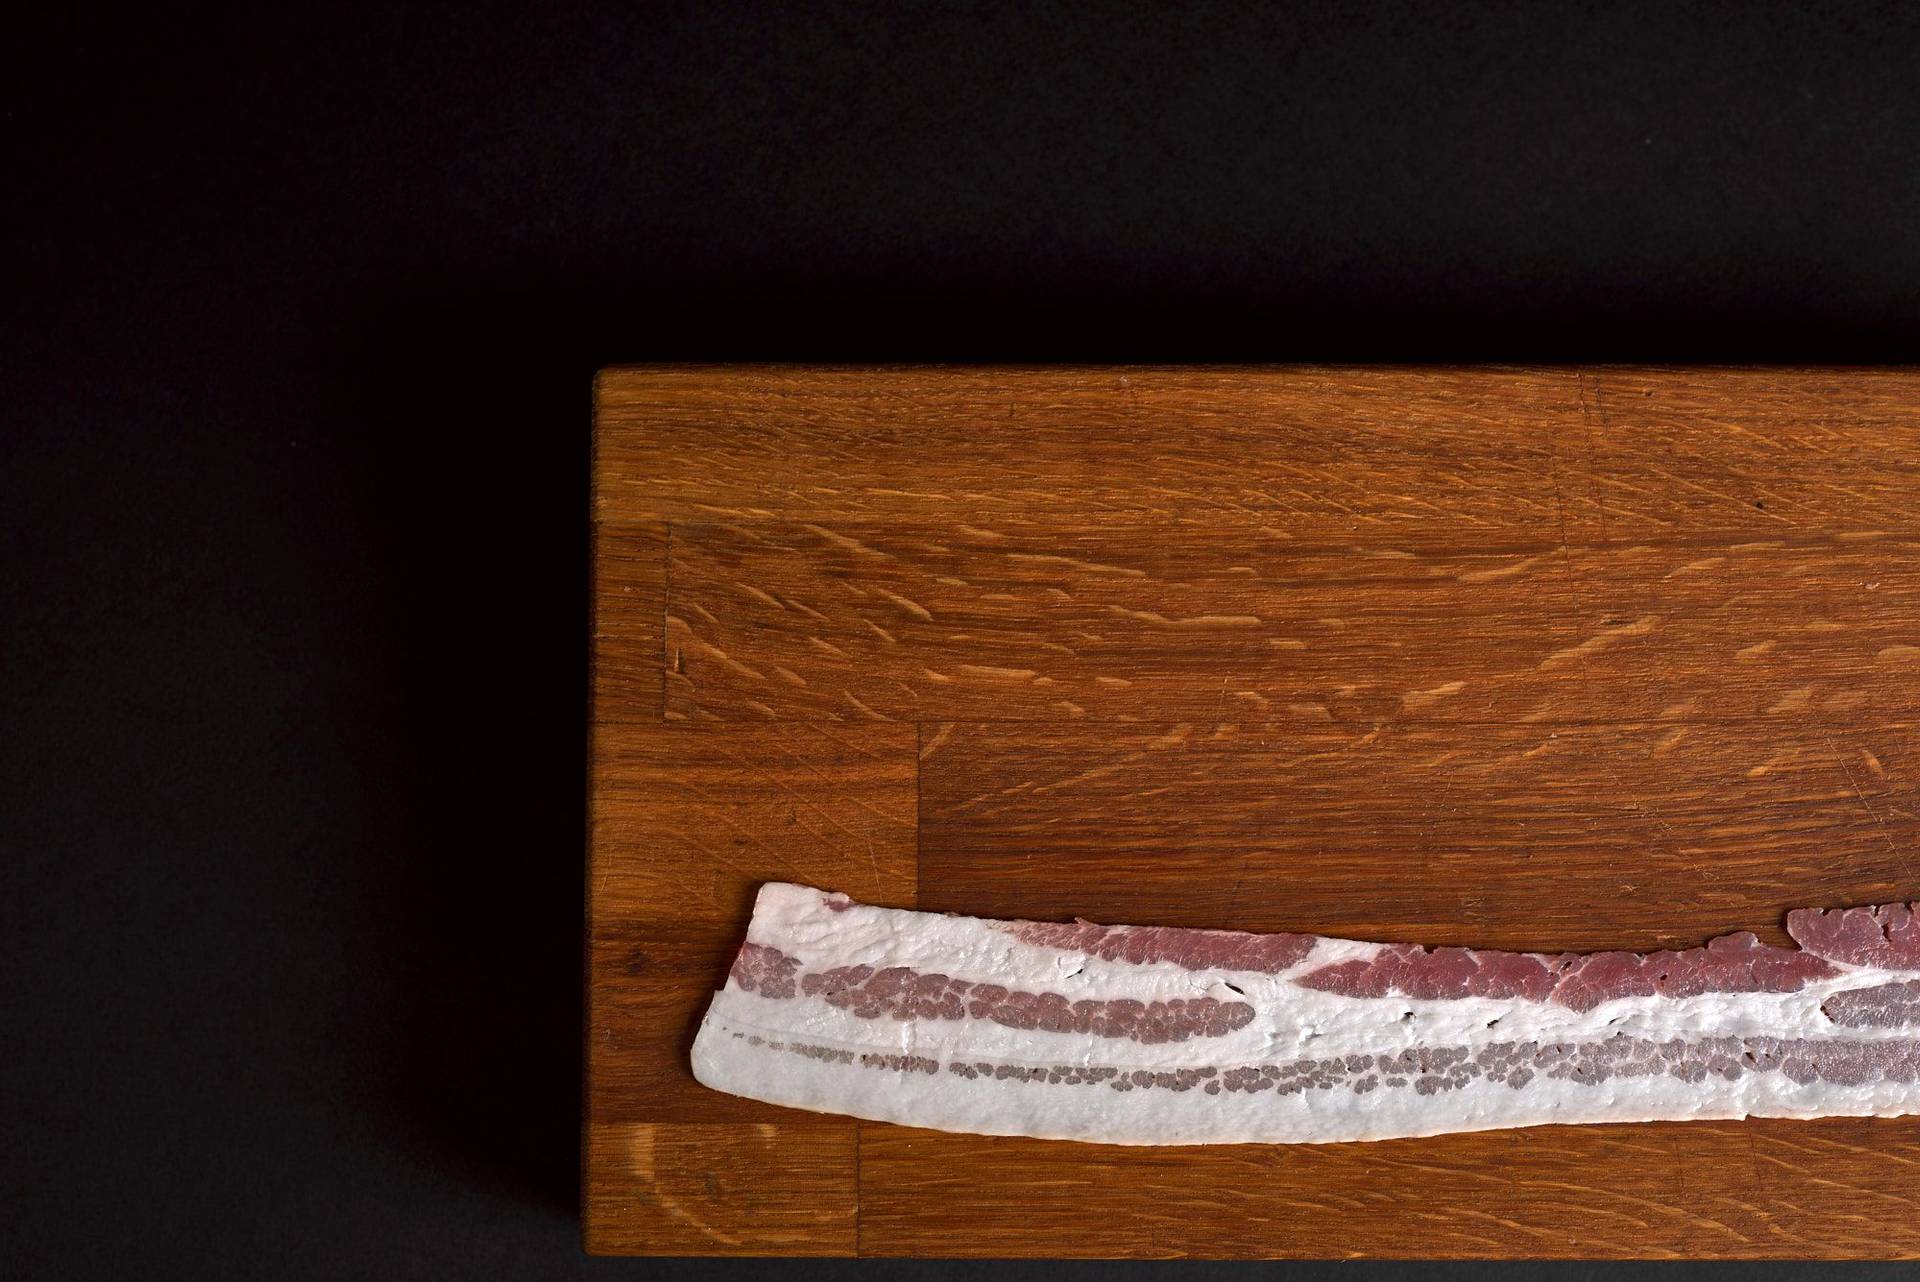 a slice of bacon on a wooden board on a sapienstone top